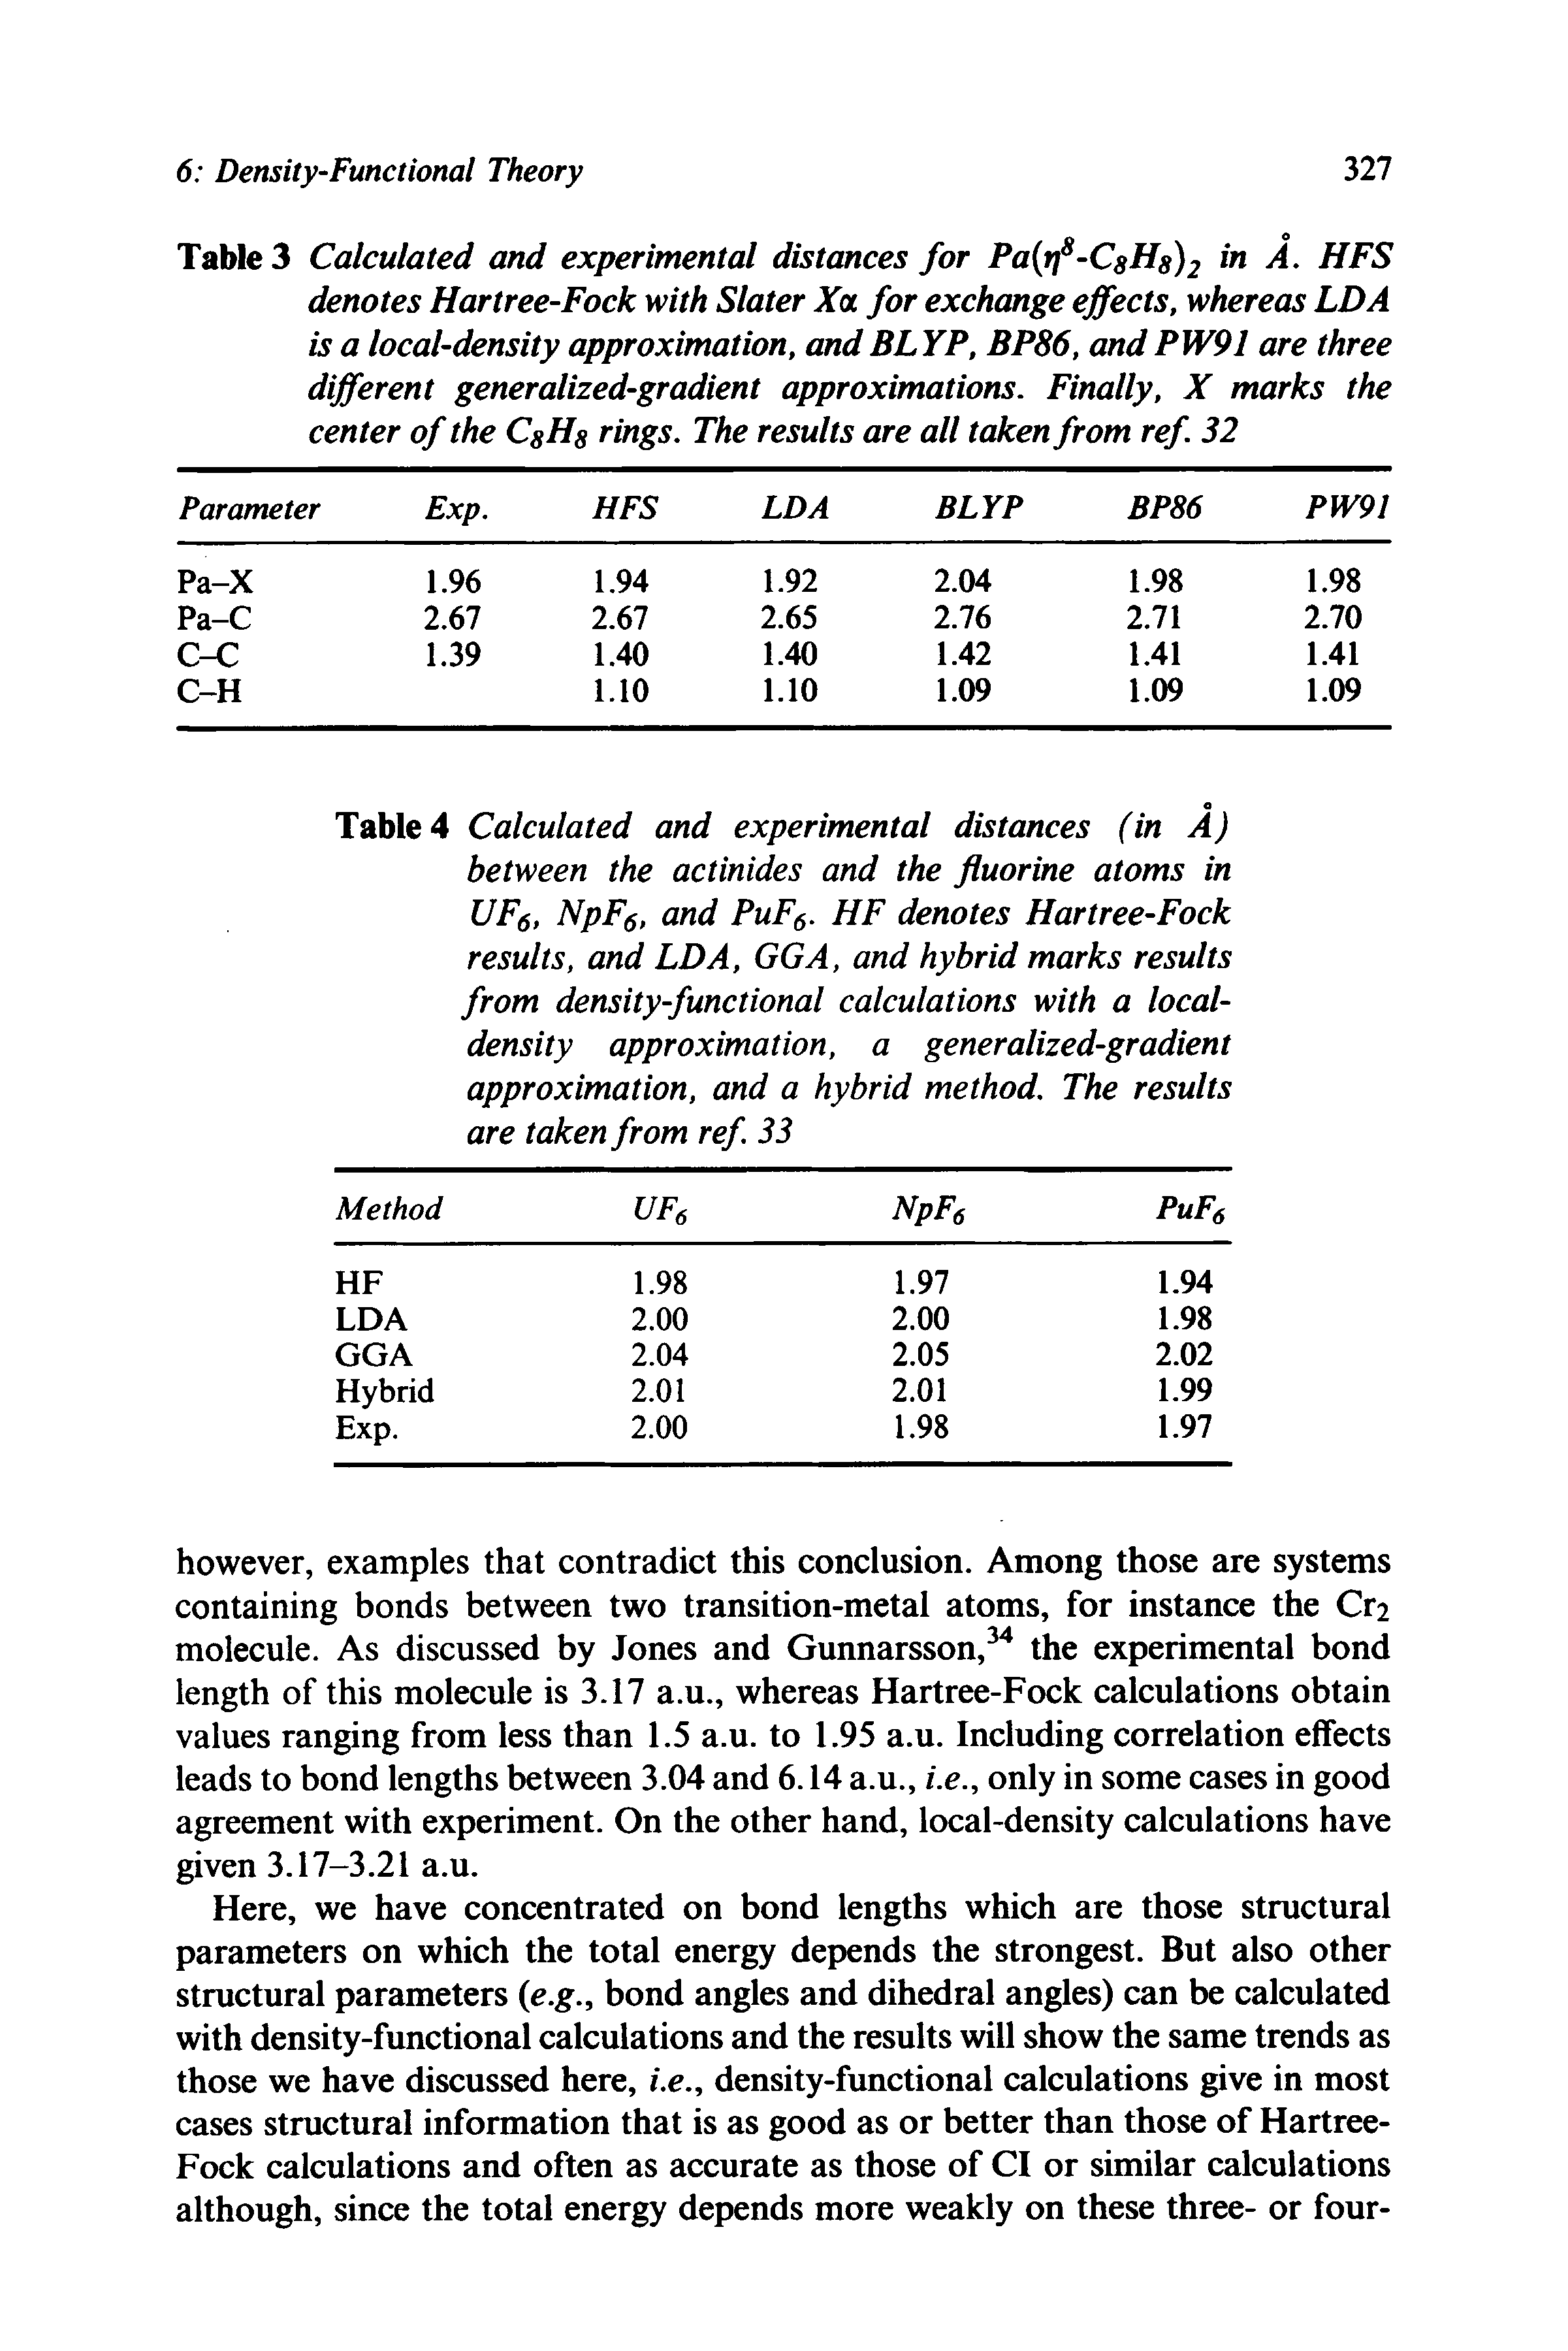 Table 3 Calculated and experimental distances for Pa tf-CsHs)2 in A. HFS denotes Hartree-Fock with Slater Xa for exchange effects, whereas LDA is a local-density approximation, andBLYP, BP86, and PW91 are three different generalized-gradient approximations. Finally, X marks the center of the CgHg rings. The results are all taken from ref. 32...